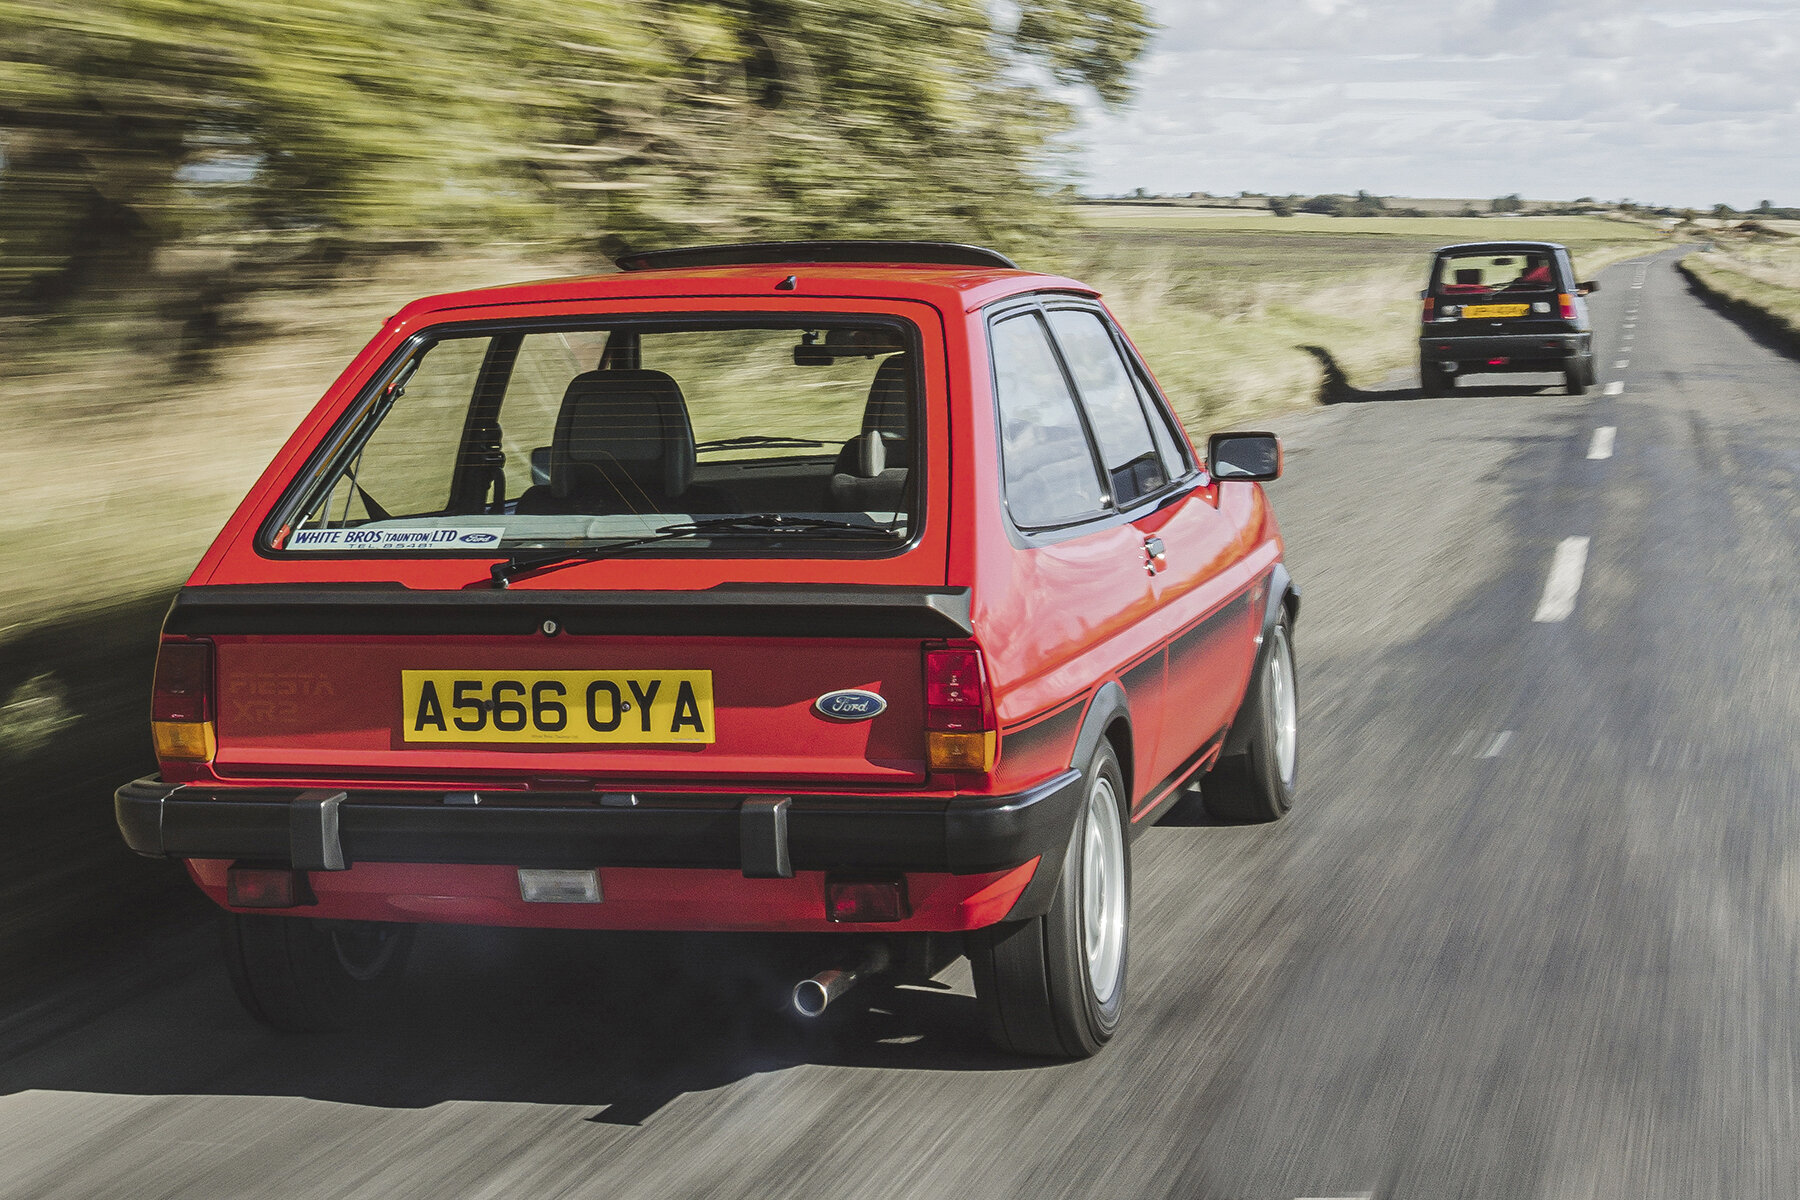 Ford Fiesta XR2 takes on Renault 5 Gordini Turbo in the June 2020 issue of Modern Classics magazine